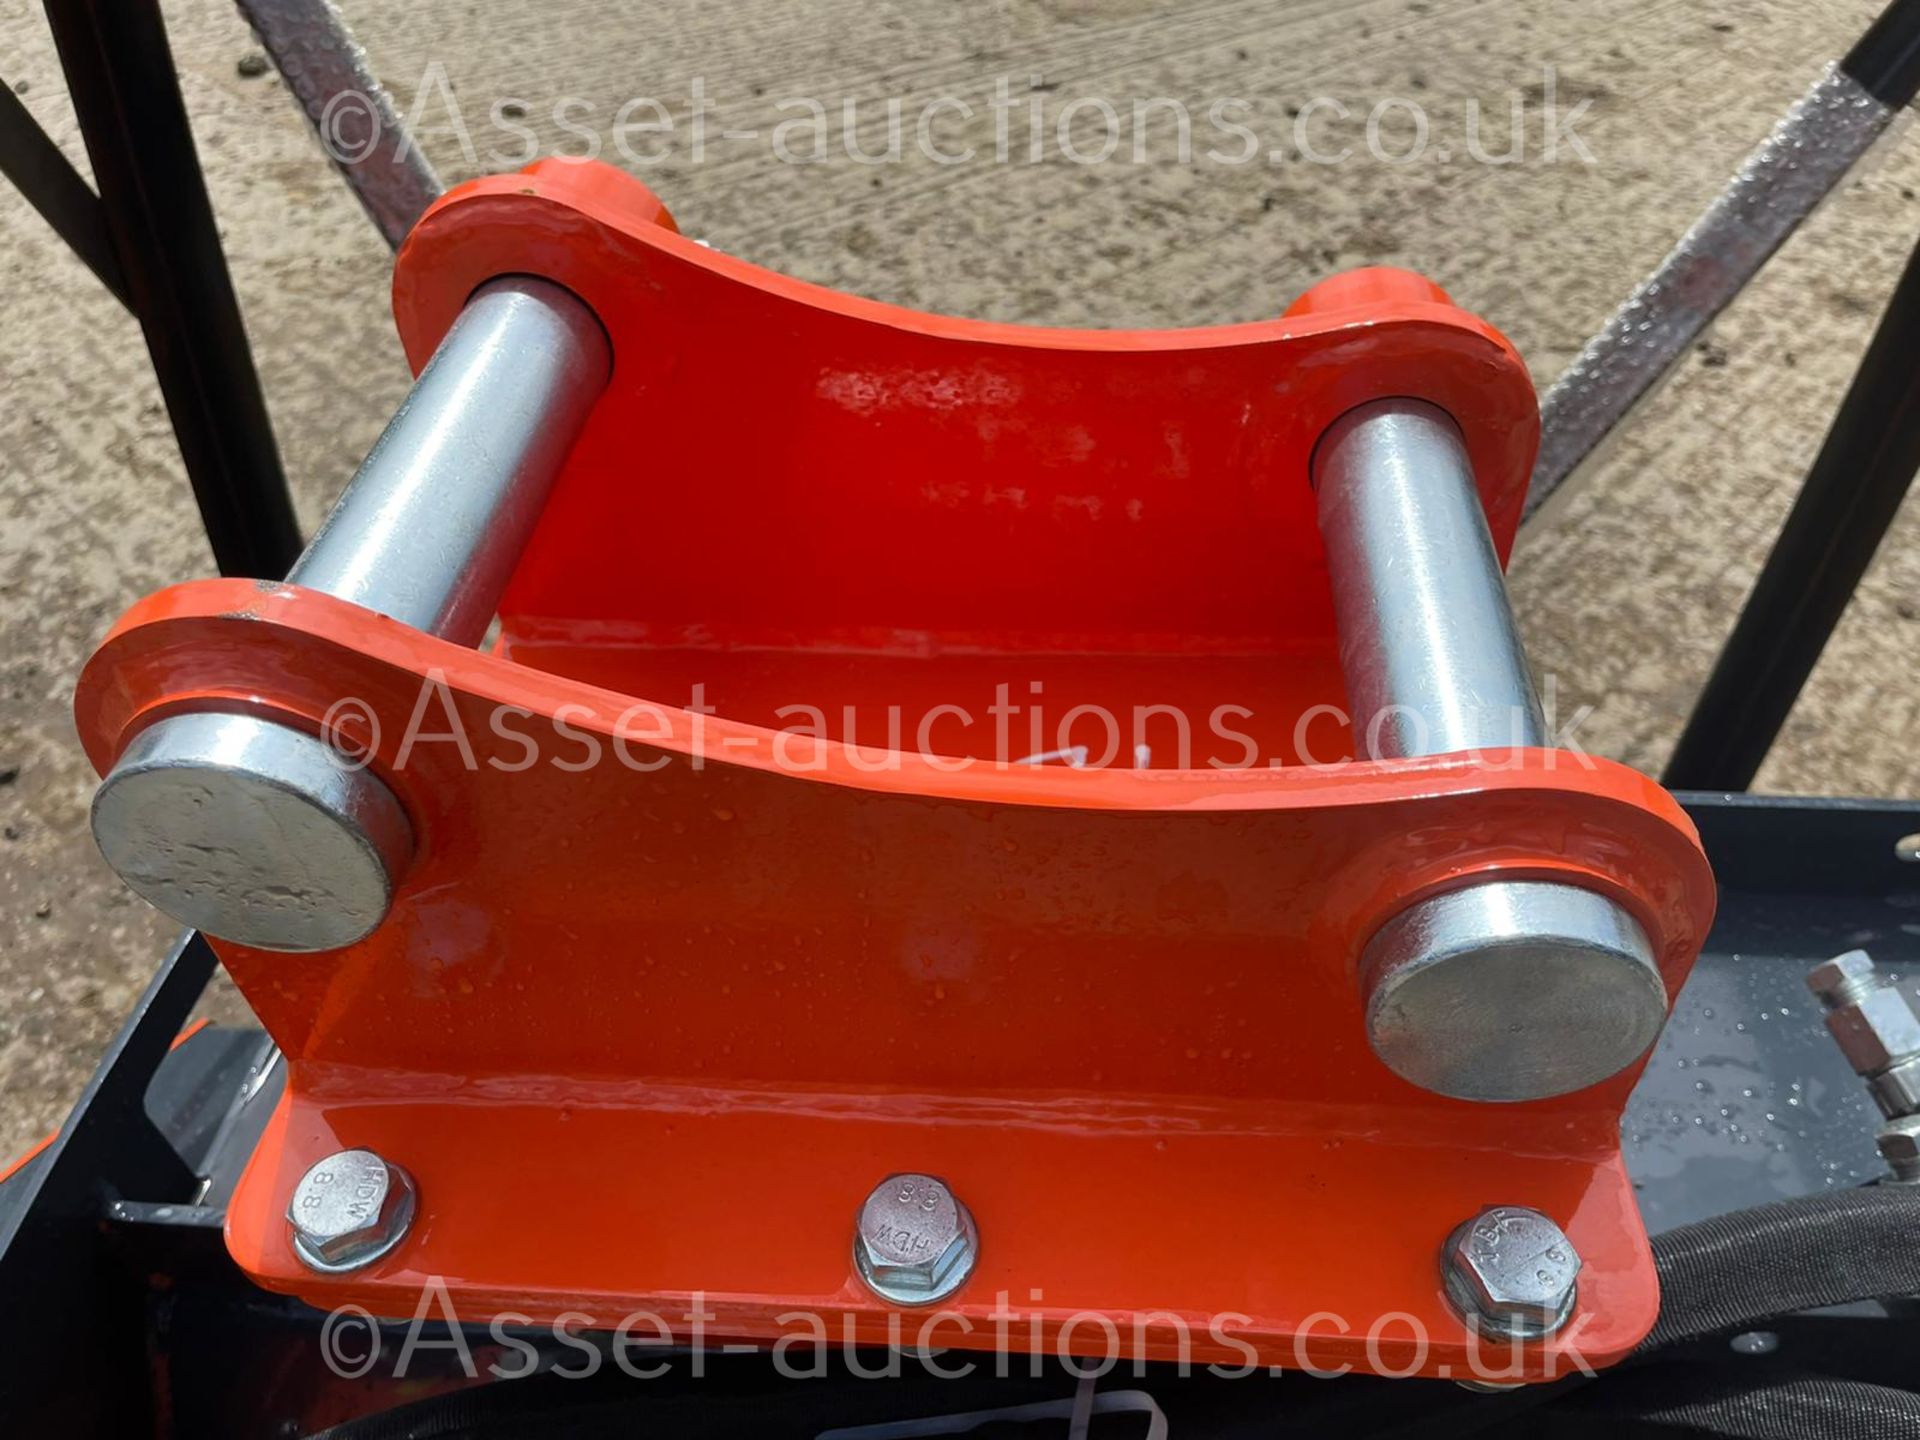 NEW AND UNUSED HEAVY DUTY MULCHER FLAIL MOWER, HYDRAULIC DRIVEN, 45mm PINS *PLUS VAT* - Image 11 of 20